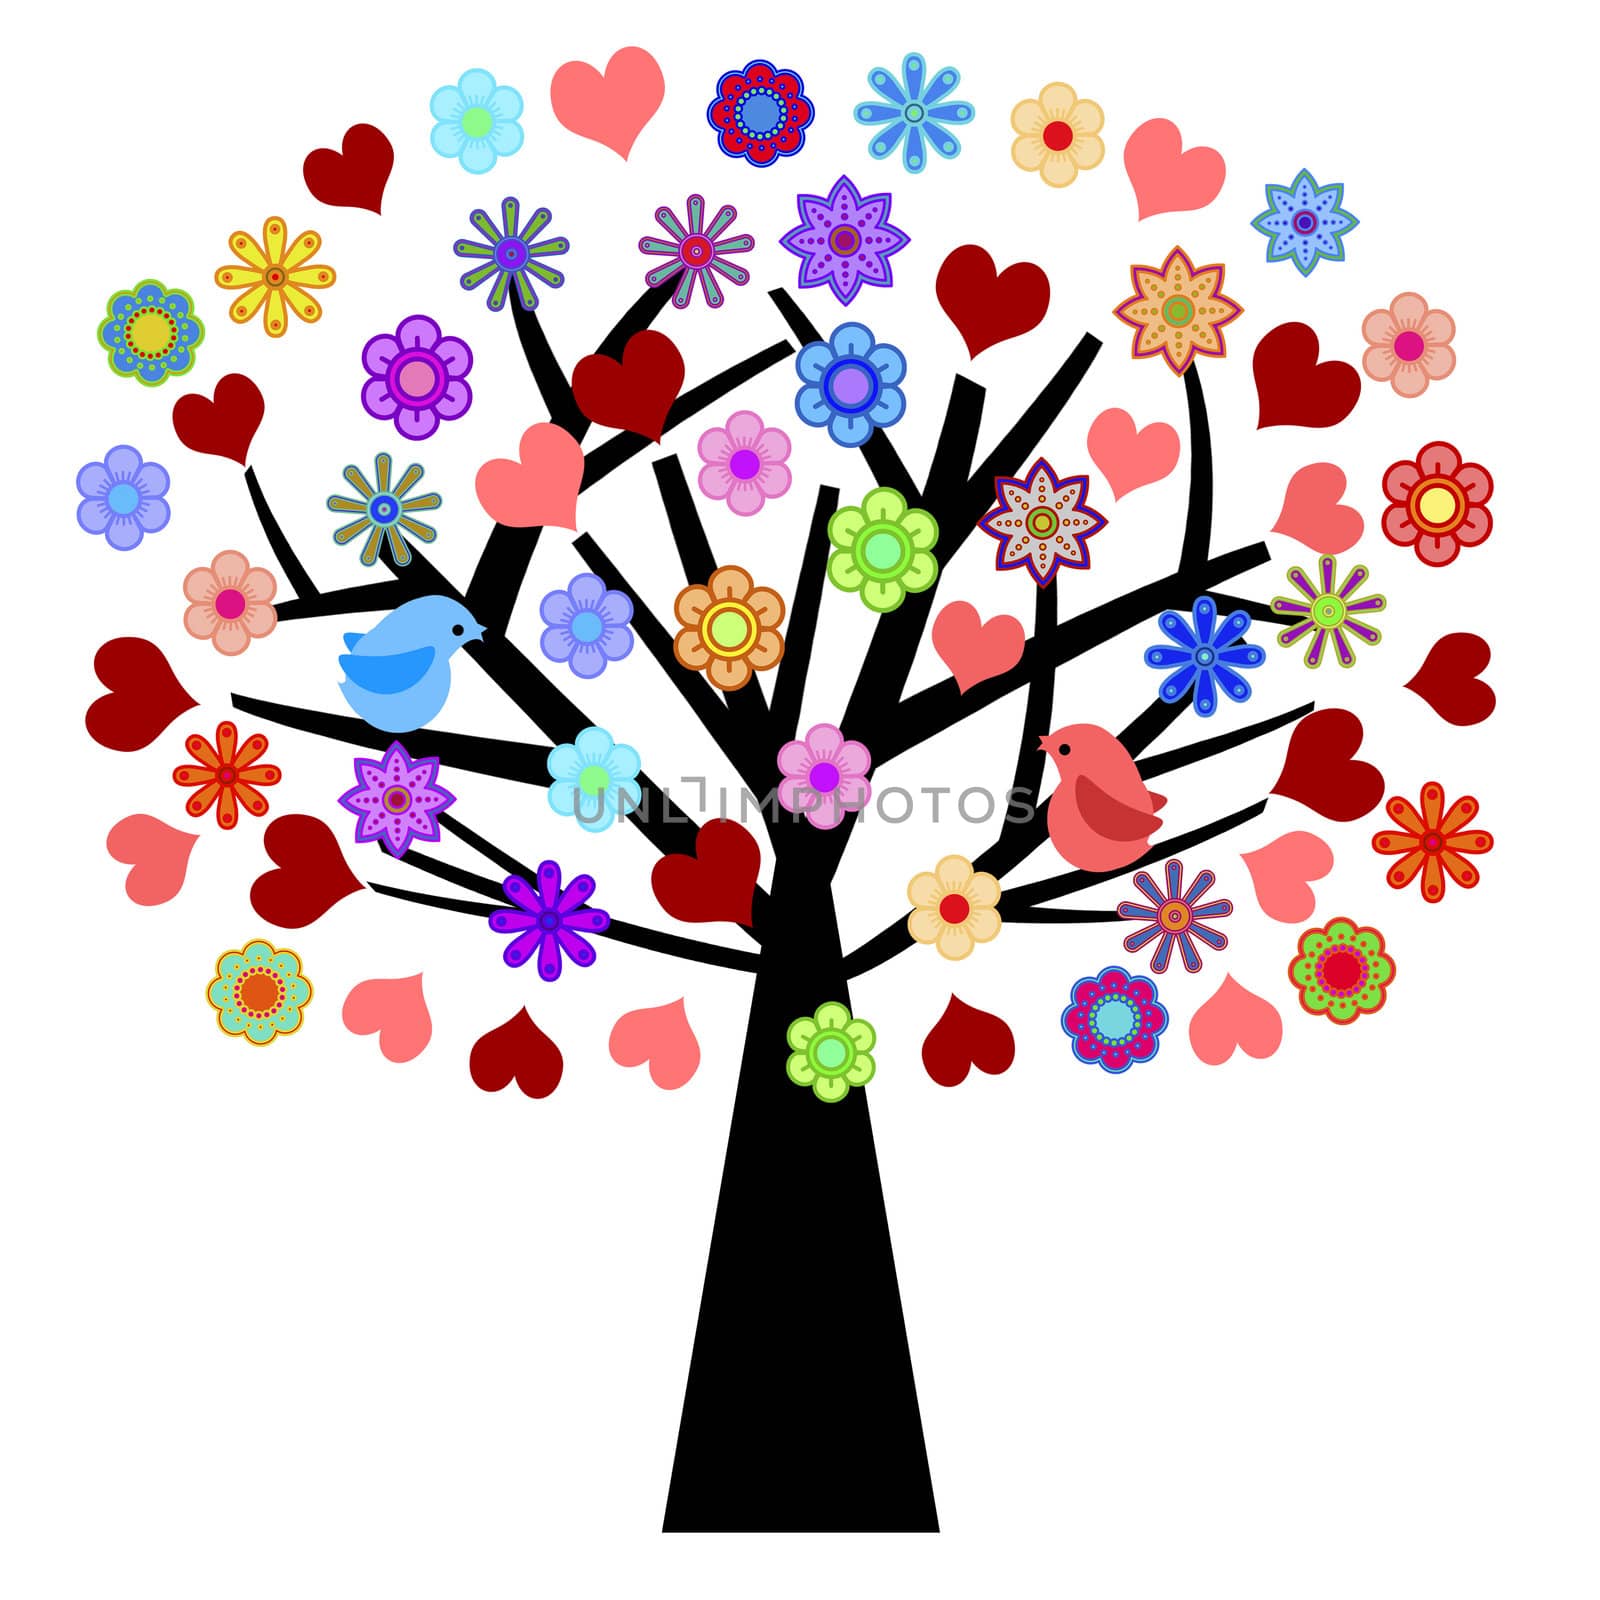 Valentines Day Tree with Love Birds Hearts Flowers Illustration